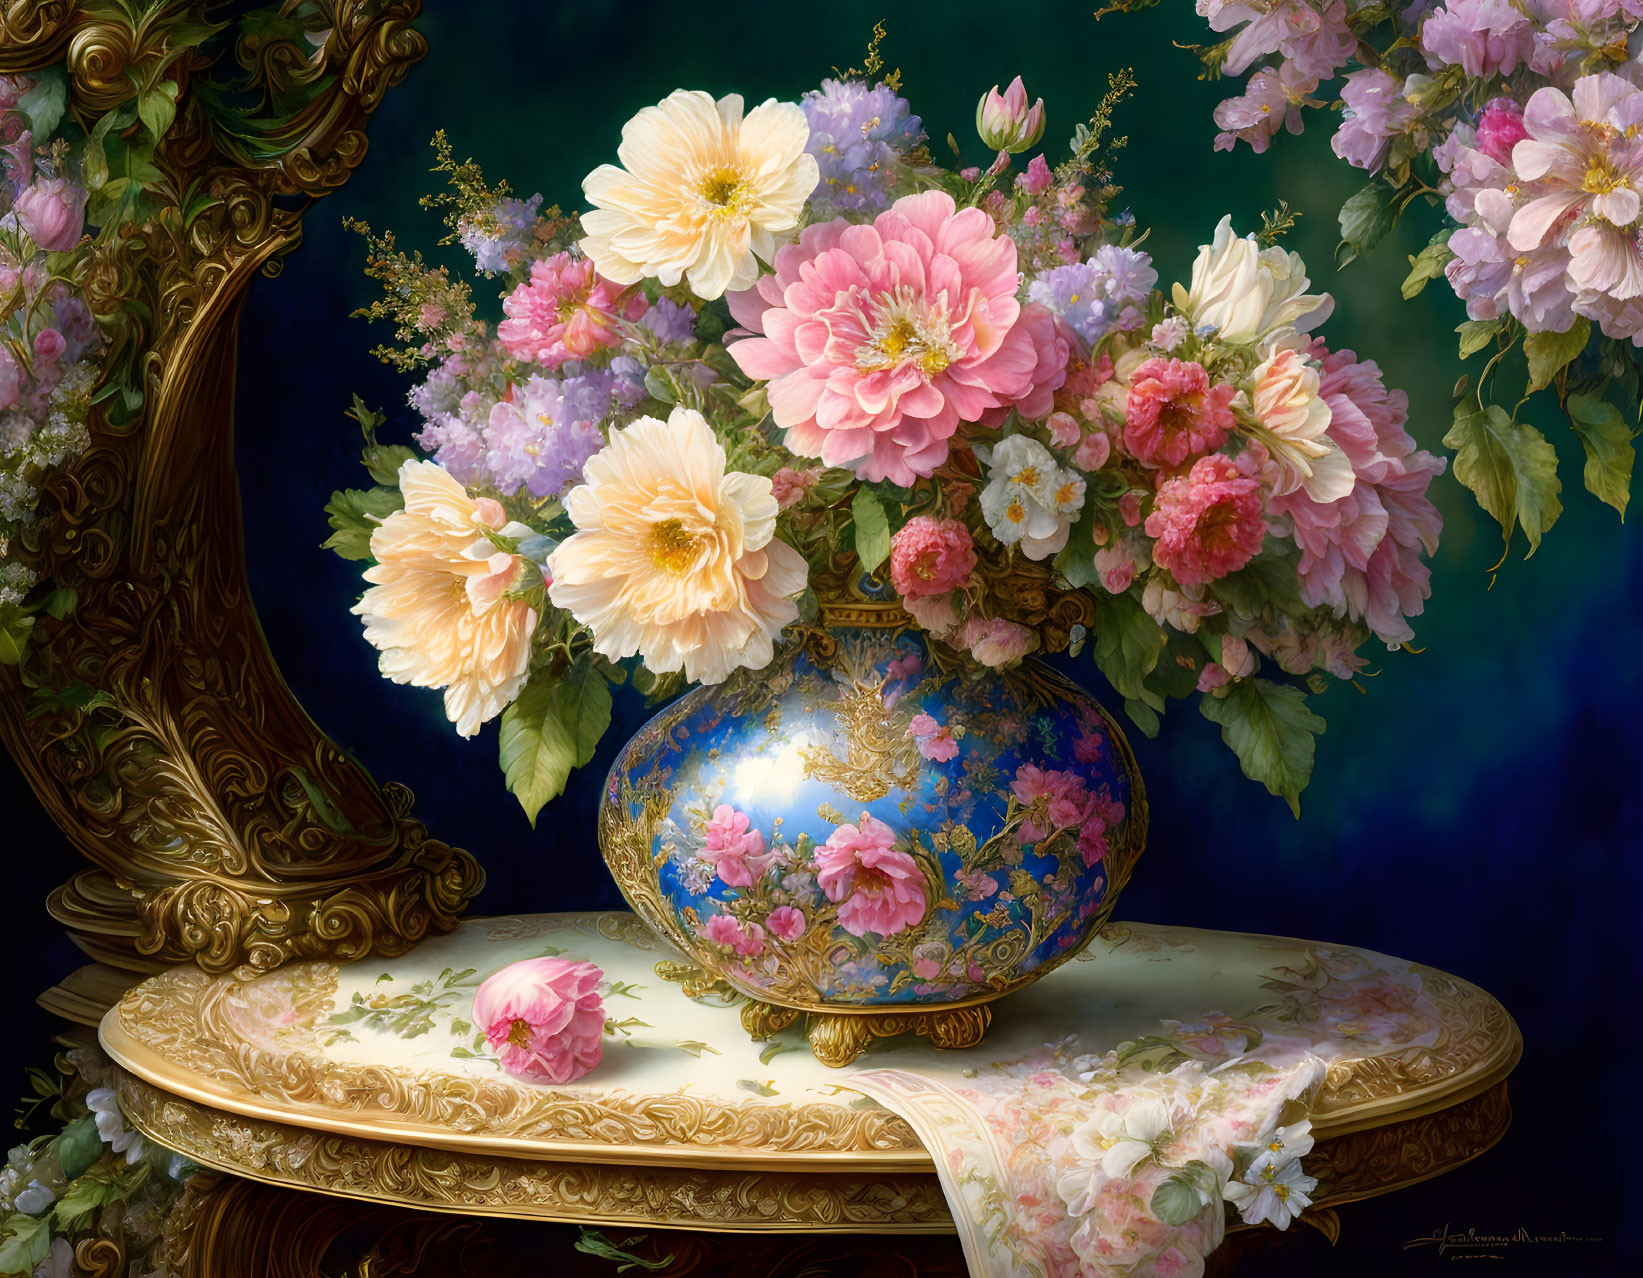 Intricate still life: Pink flowers in blue vase on floral table